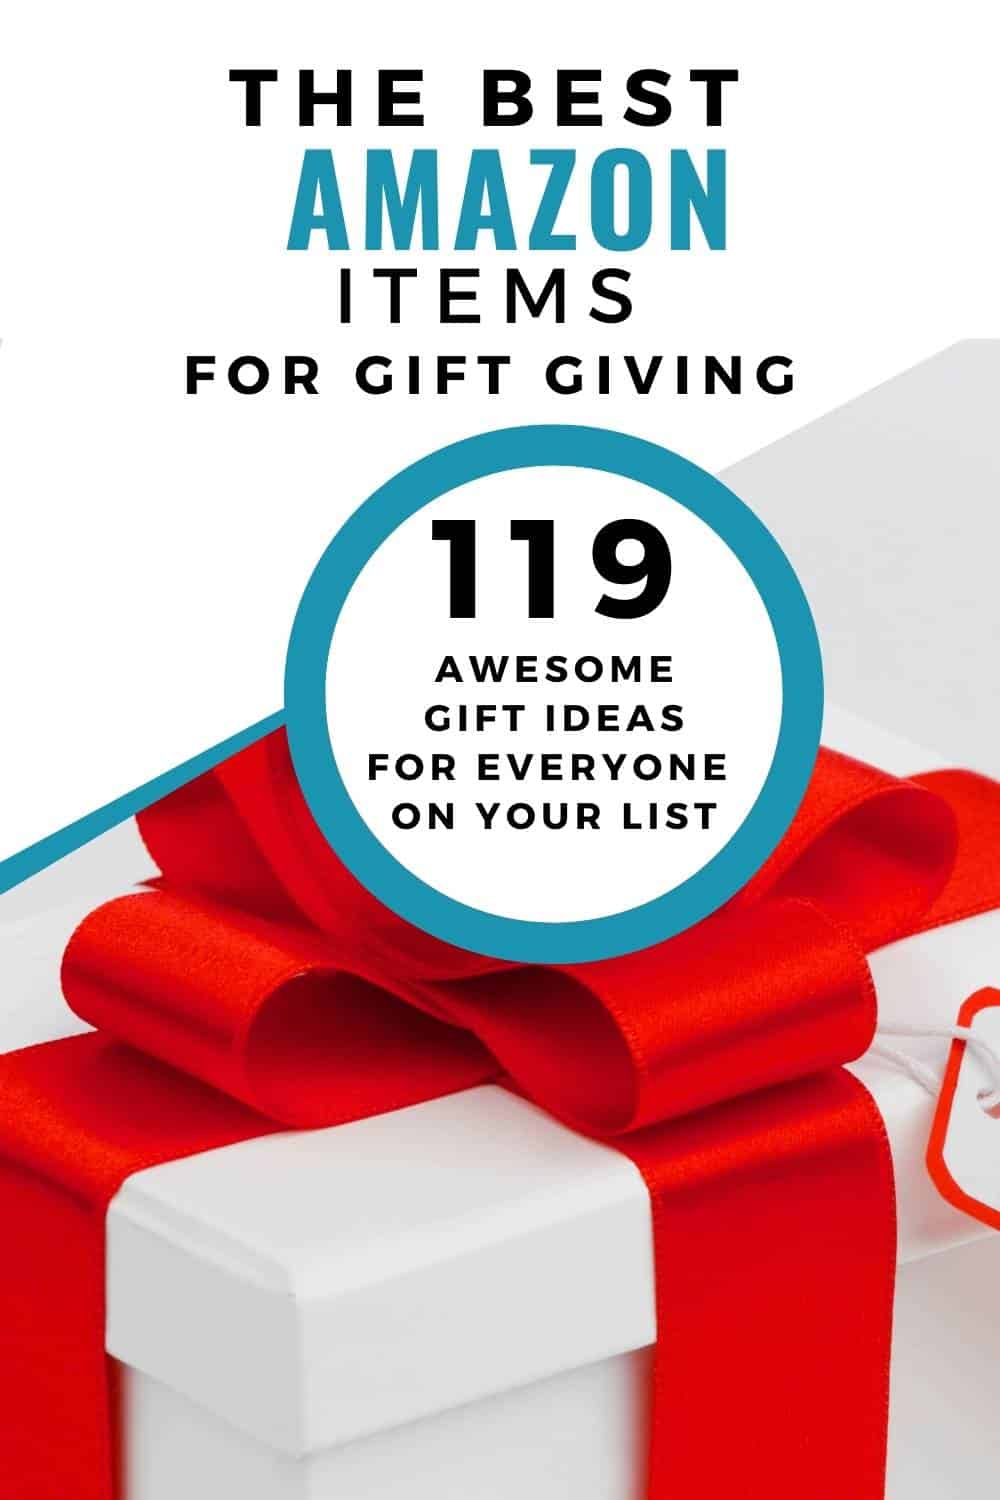 The Best Amazon Items Gift Guide